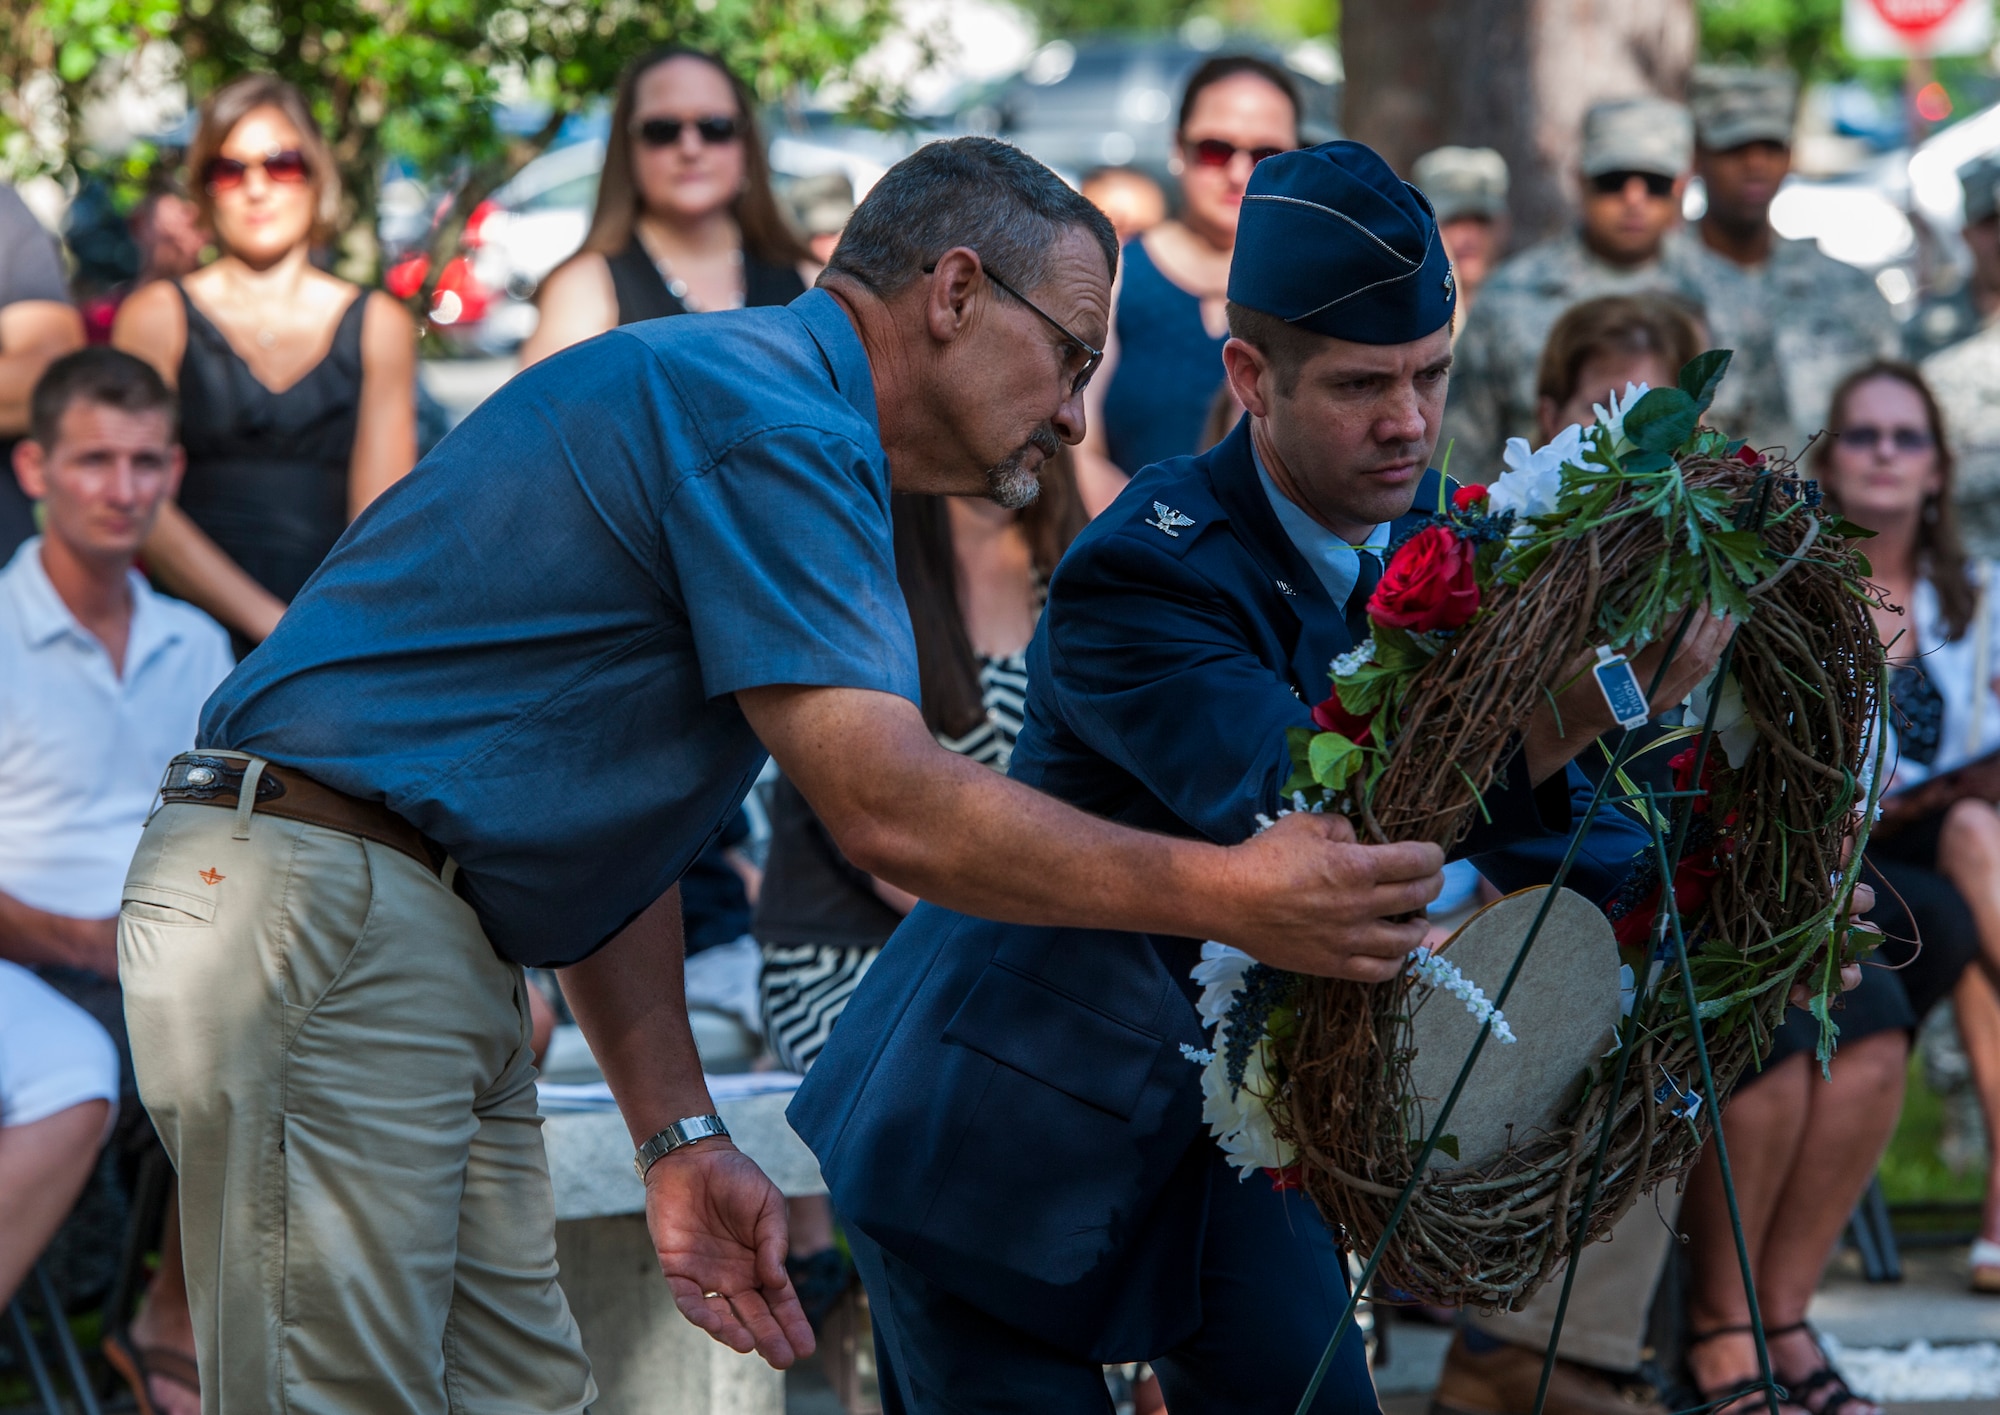 Tech. Sgt. (retired) David Westrup, left, 58th Fighter Squadron crew chief, and Col. Lance Pilch, 33rd Fighter Wing commander, place a wreath during the 19th anniversary Khobar Tower memorial ceremony, June 25, 2015, on Eglin Air Force Base, Florida. On June 25, 1996, a truck-bomb was detonated adjacent to Khobar Tower in Dhahran, Saudi Arabia, that resulted in 400 injured U.S. and international military and civilian members. (U.S. Air Force photo/Staff Sgt. Marleah Robertson)